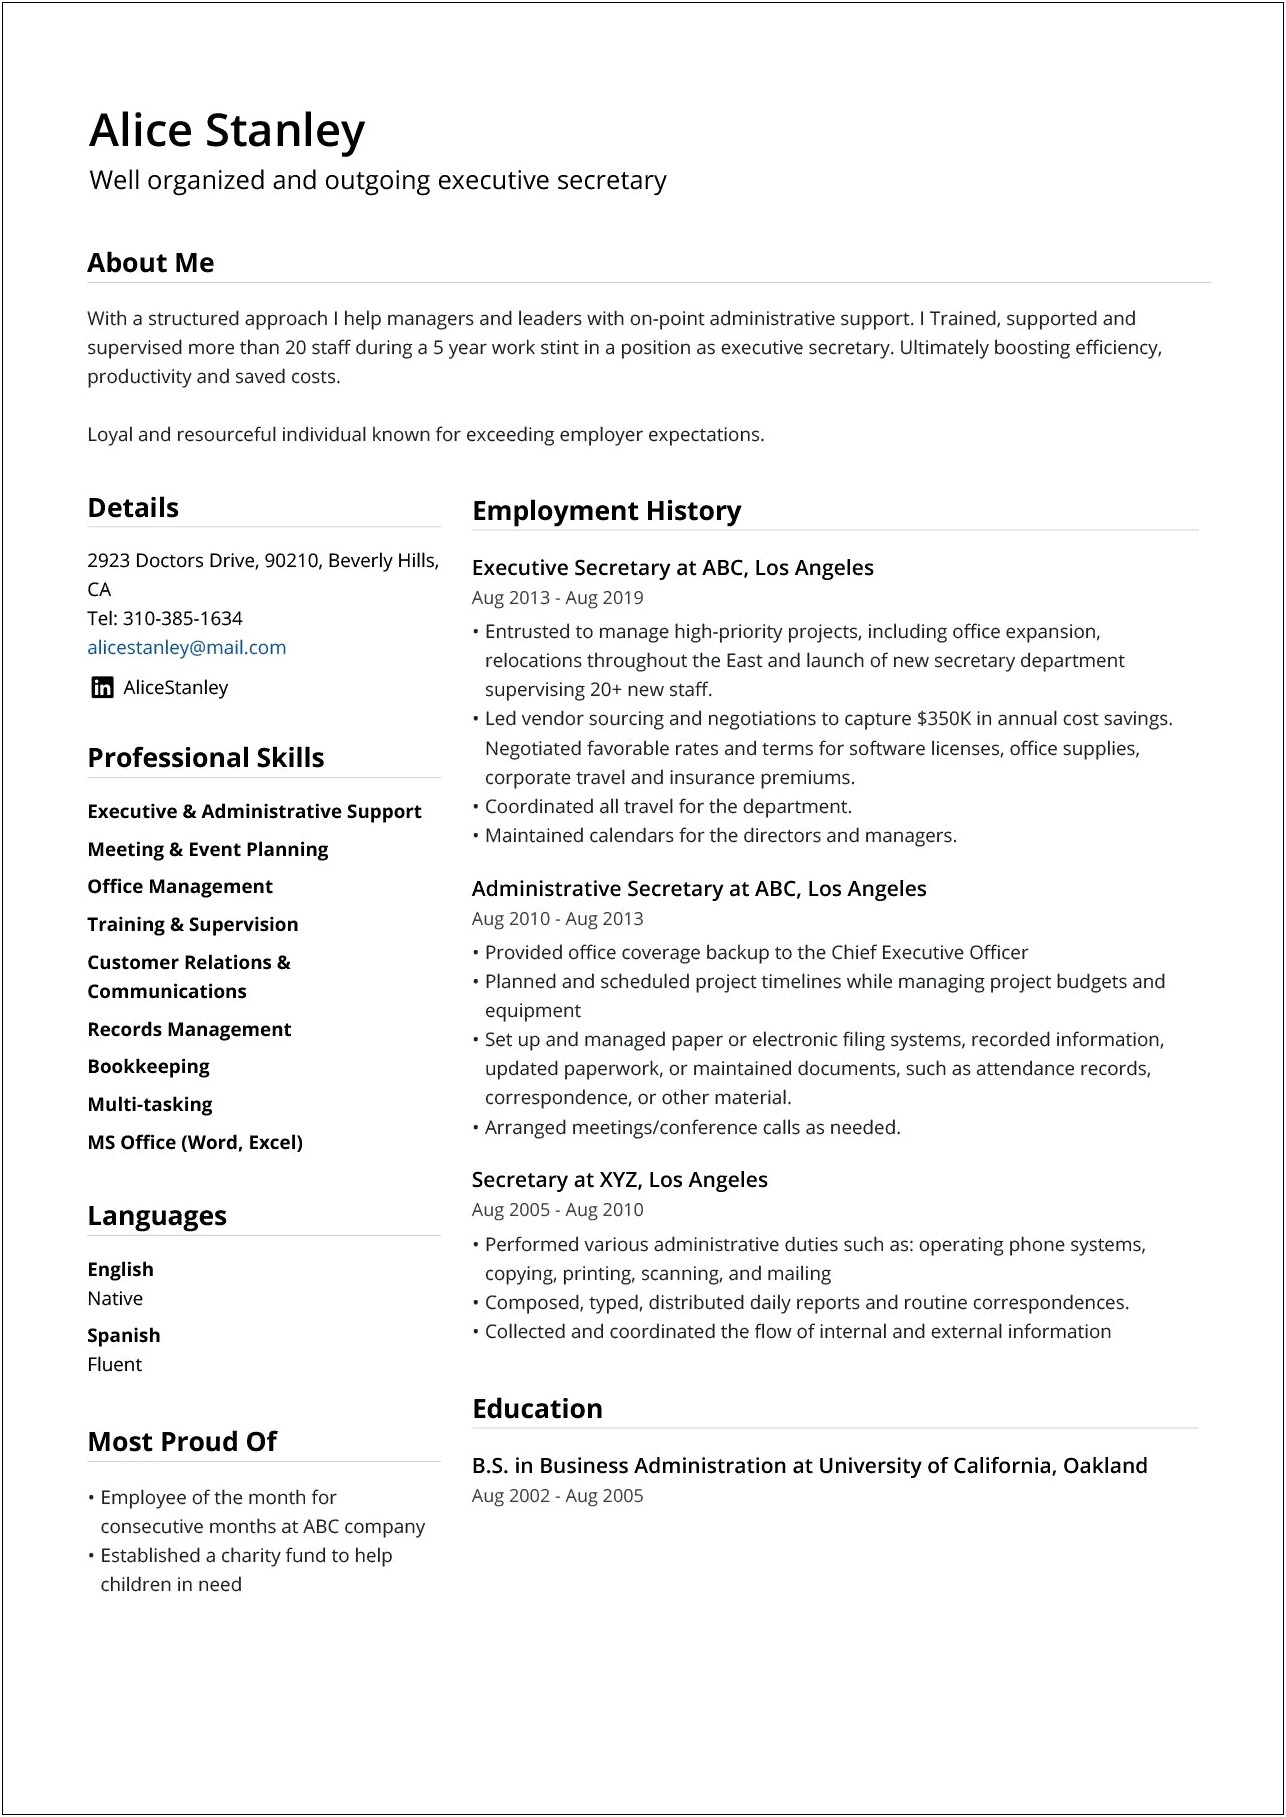 Skilled Administrative Professional Resume Example